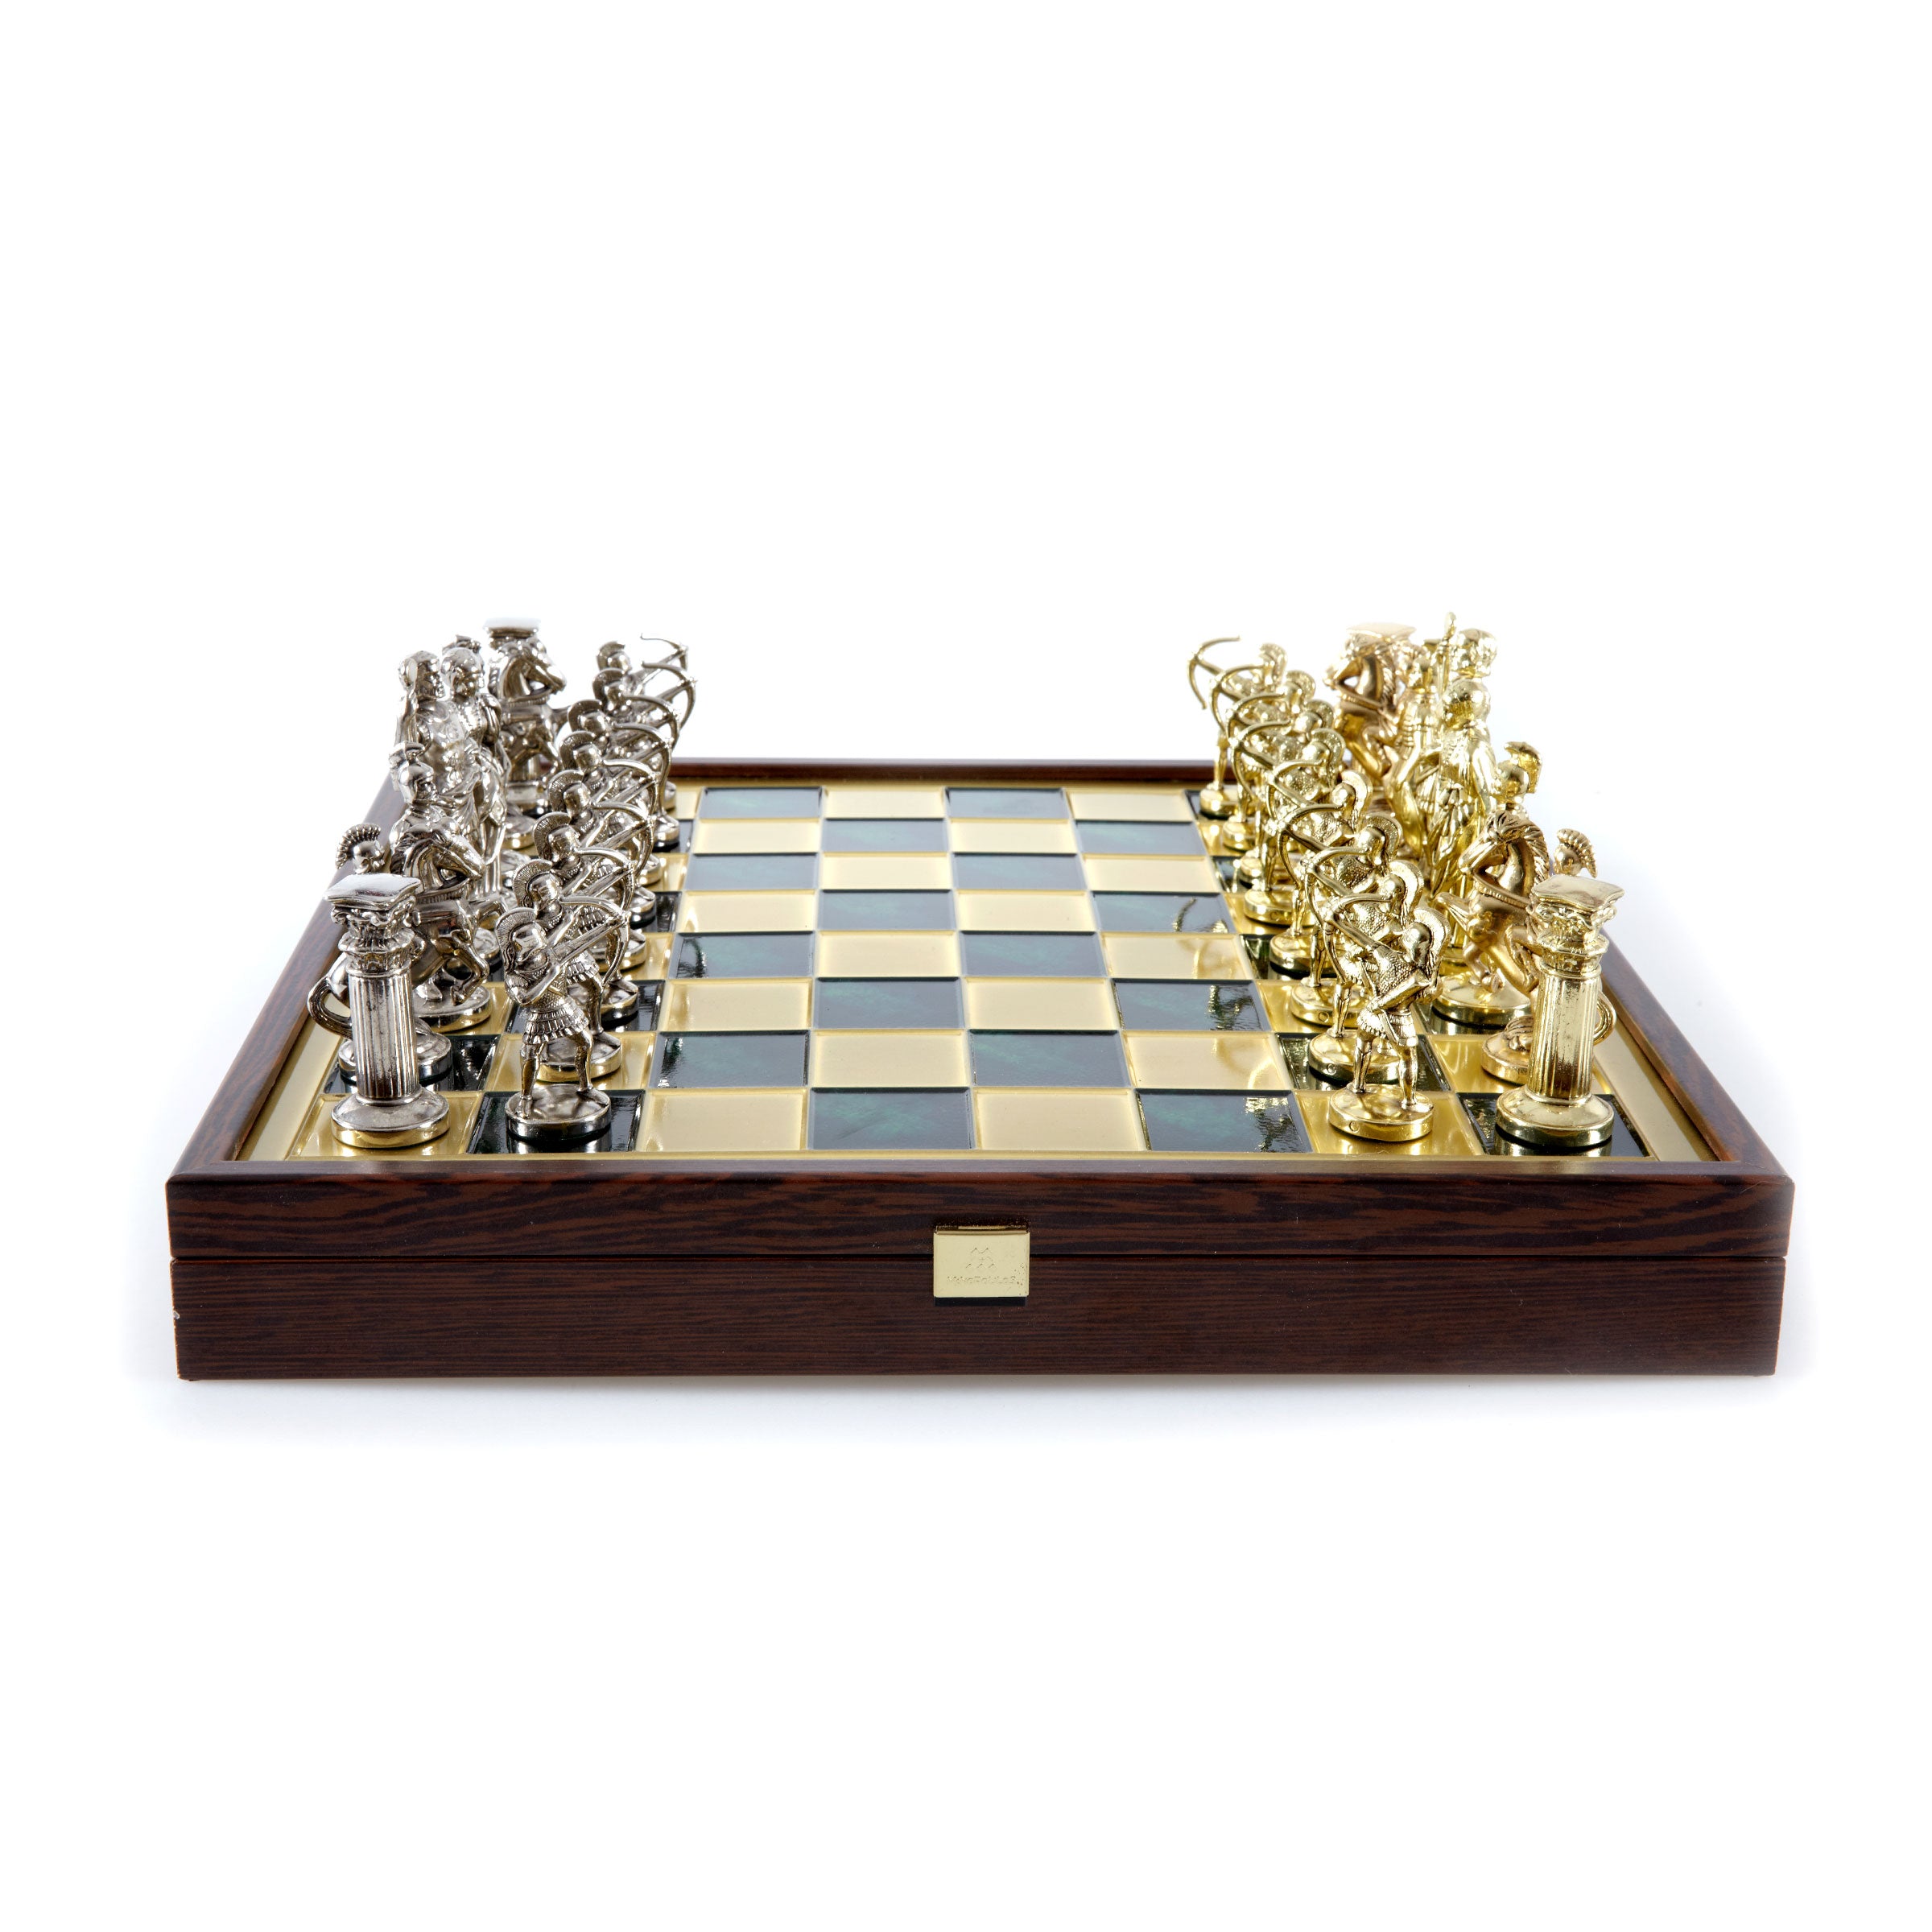 The Manopoulos Archers Luxury Chess Set with Wooden Case [S10RED